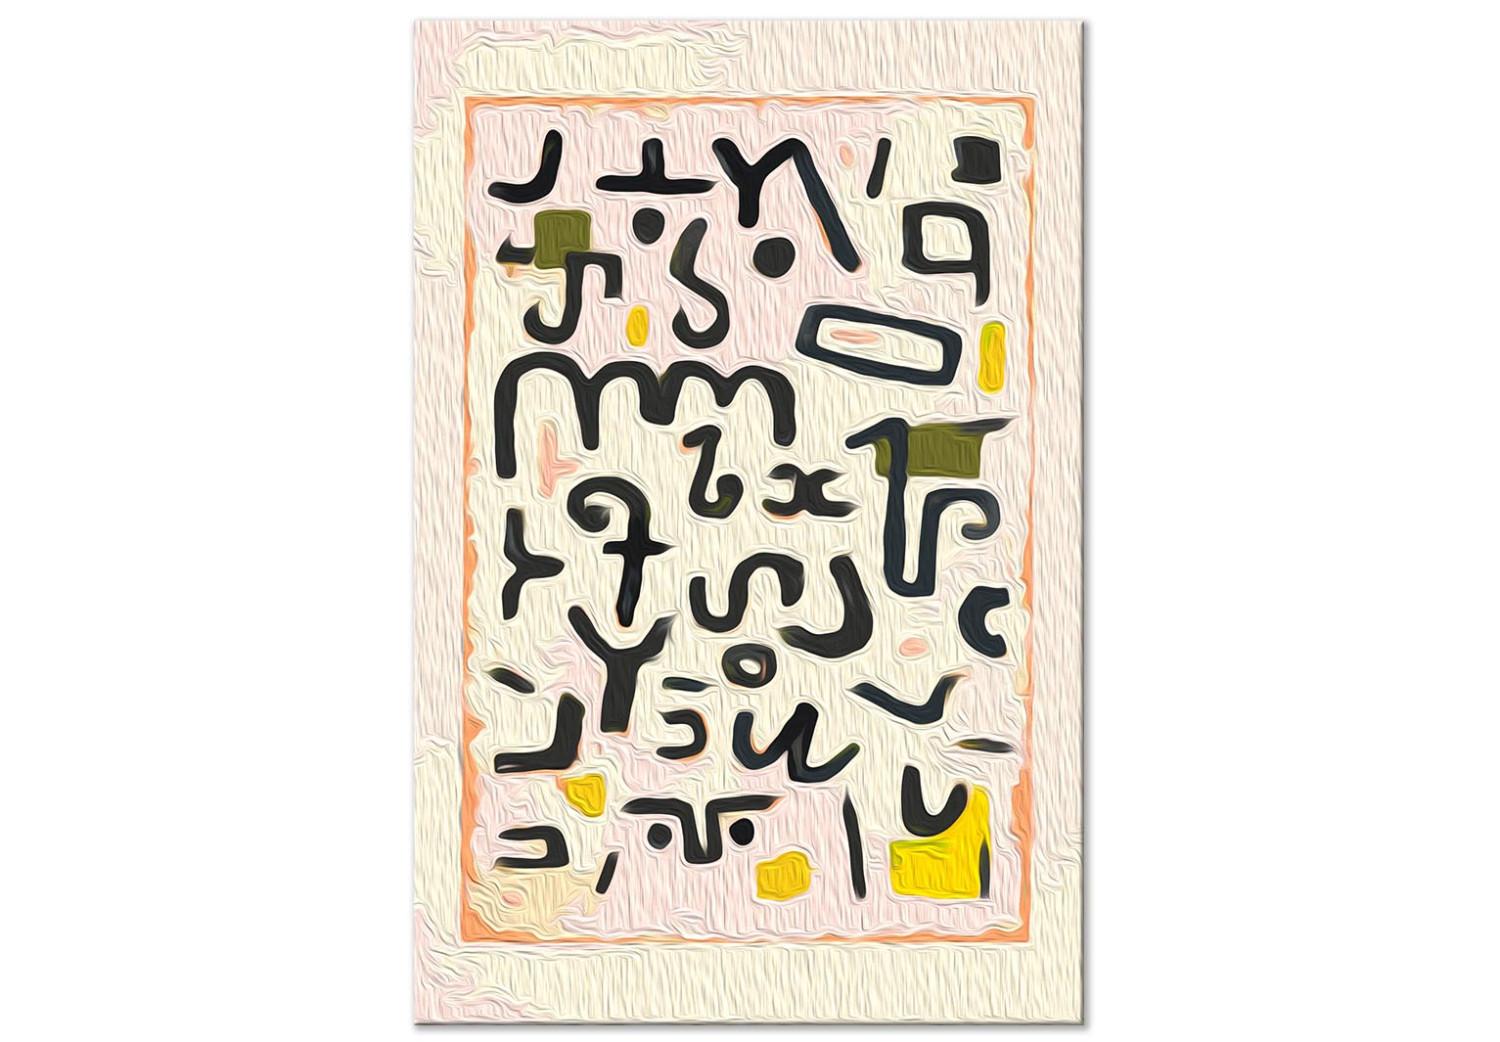 Paint by Number Kit Paul Klee, Gesetz - Alphabet, Mysterious Letters on a Cream Background